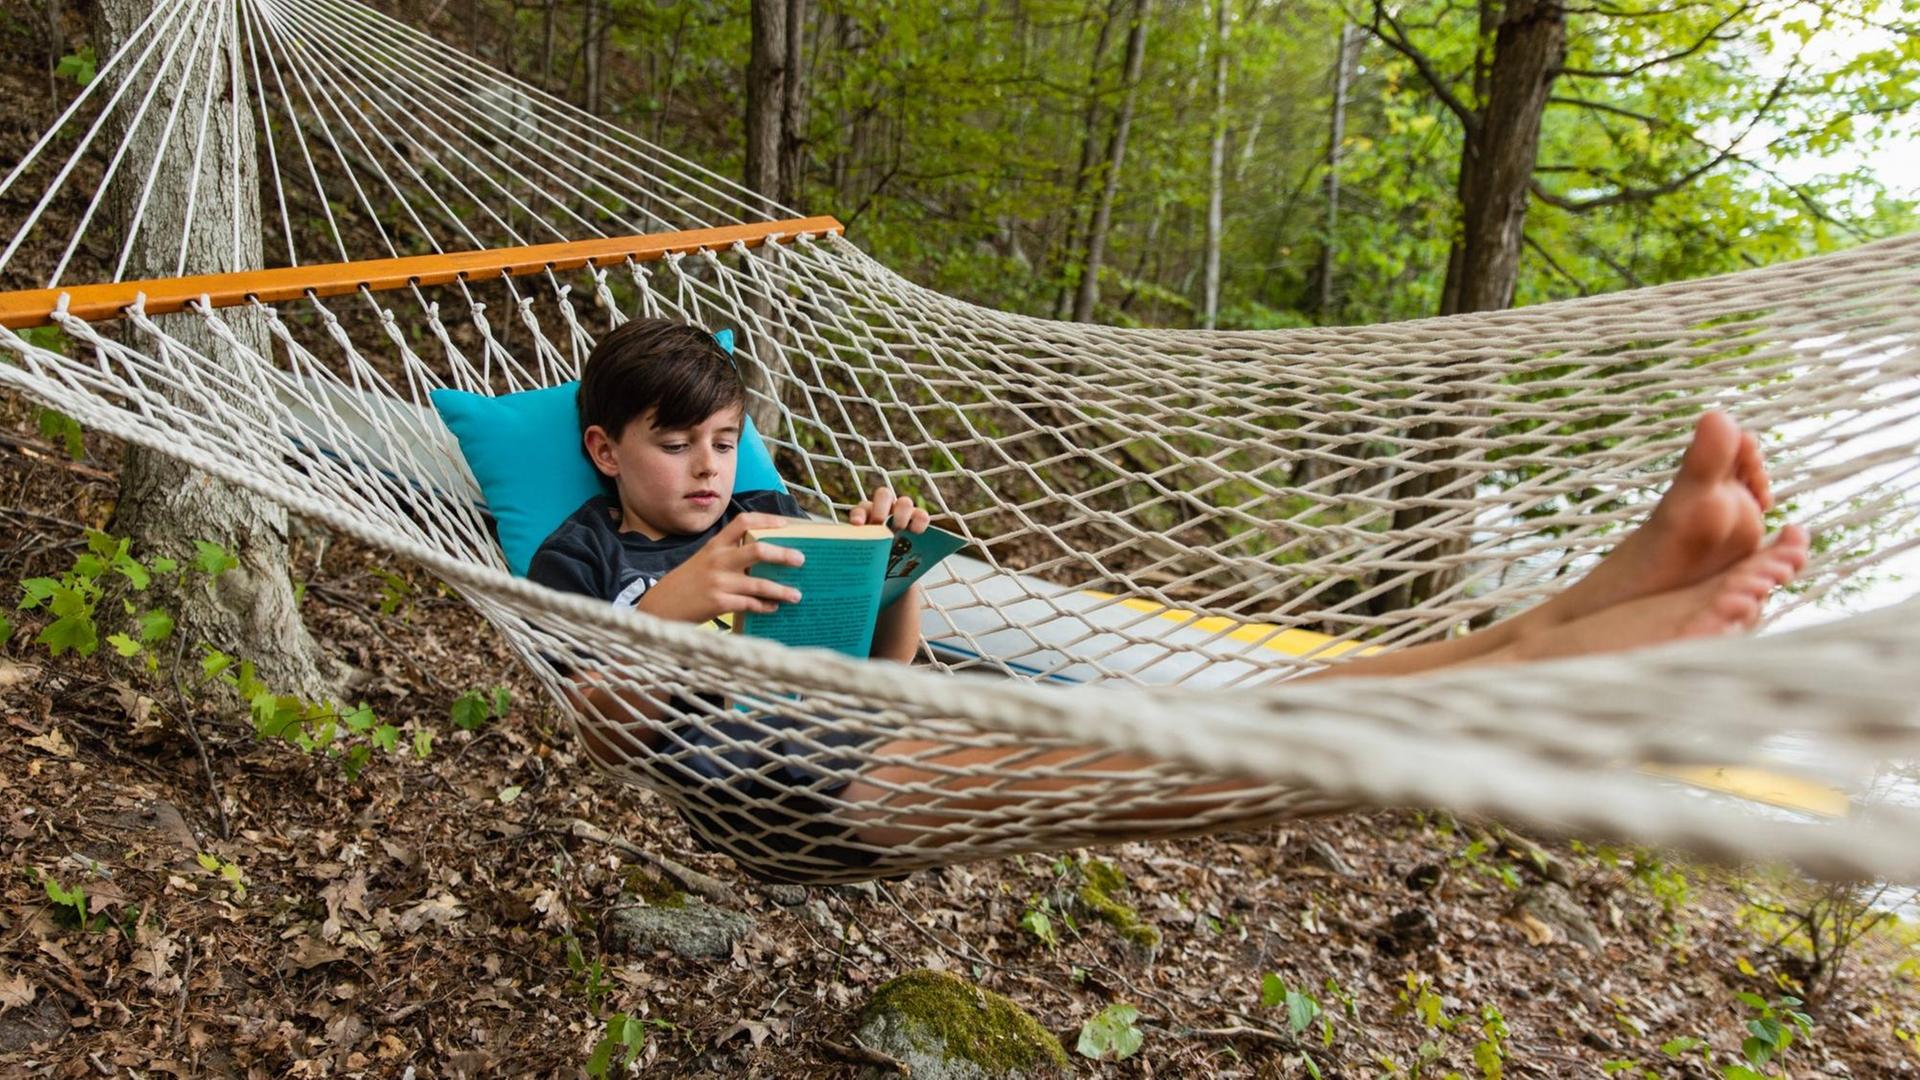 Young boy laying in a woven hammock relaxing and reading a book. Buck Lake, ON, Canada PUBLICATIONxINxGERxSUIxAUTxONLY CR_DOHO200904J-485083-01 ,model released, Symbolfoto